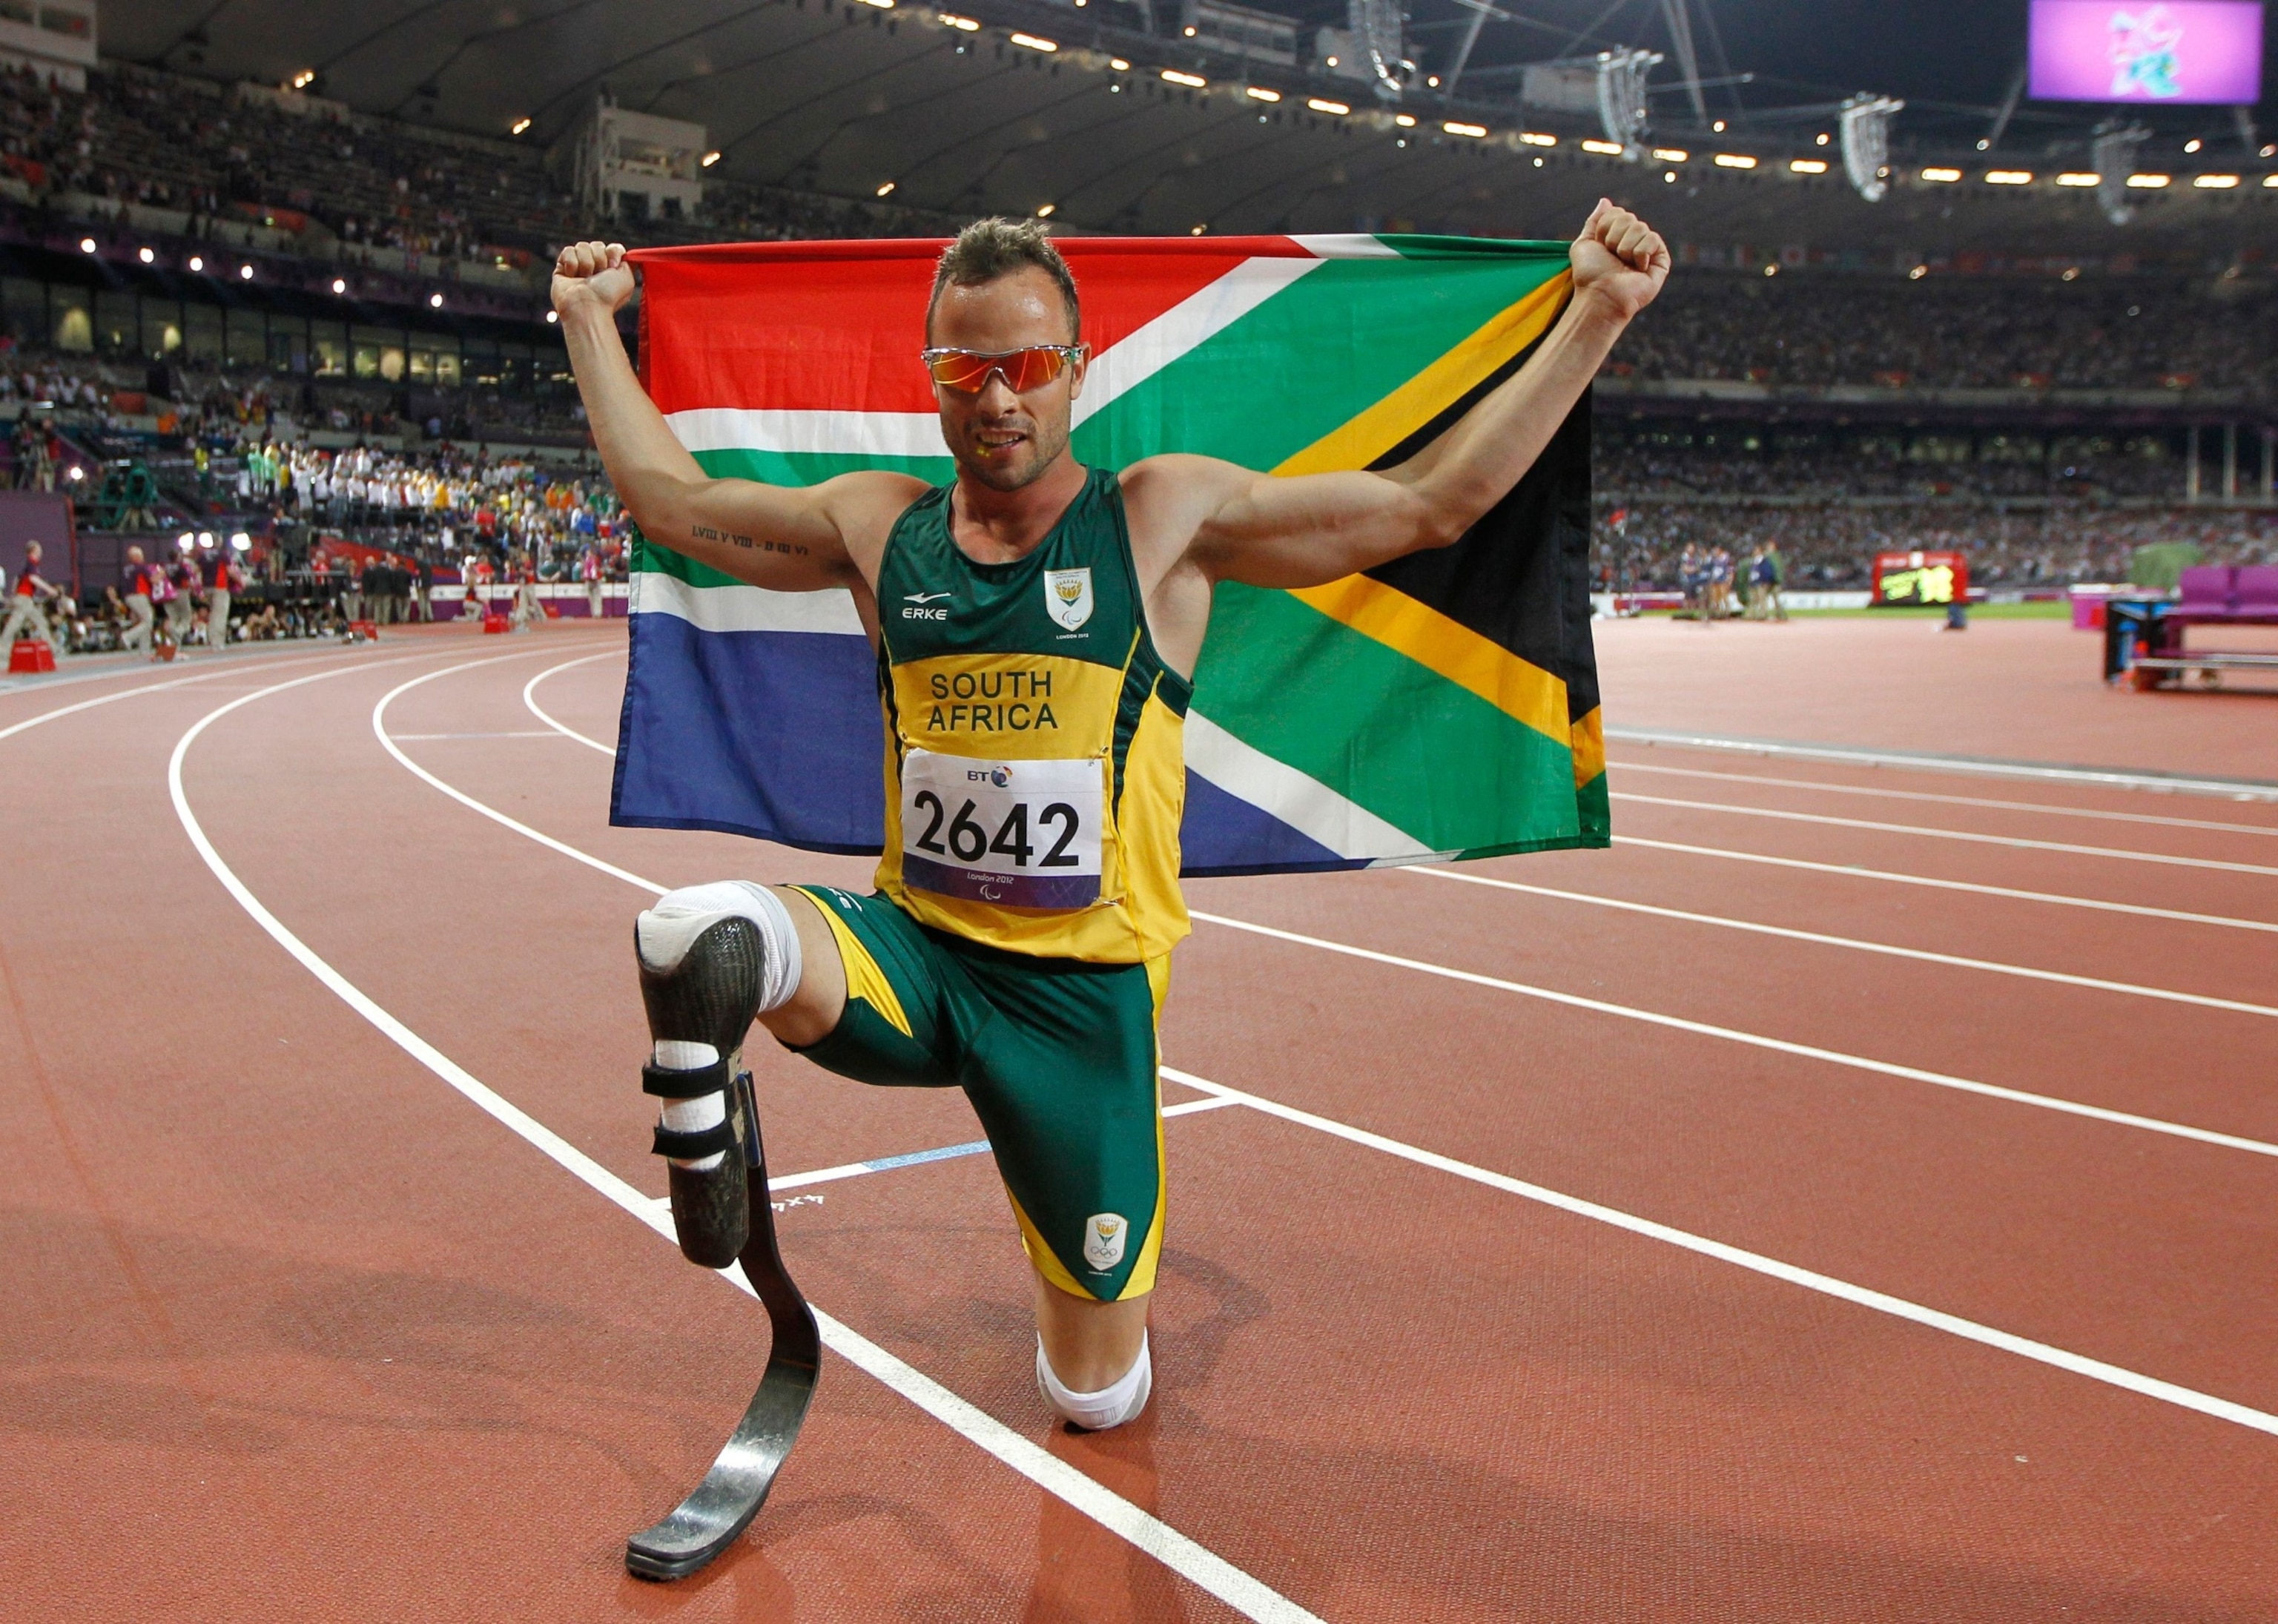 PHOTO: South Africa's Oscar Pistorius poses with photographs with a national flag after winning gold in the men's 400m - T44 final during the athletics competition at the London 2012 Paralympic Games at the Olympic Stadium in London on Sept. 8, 2012.